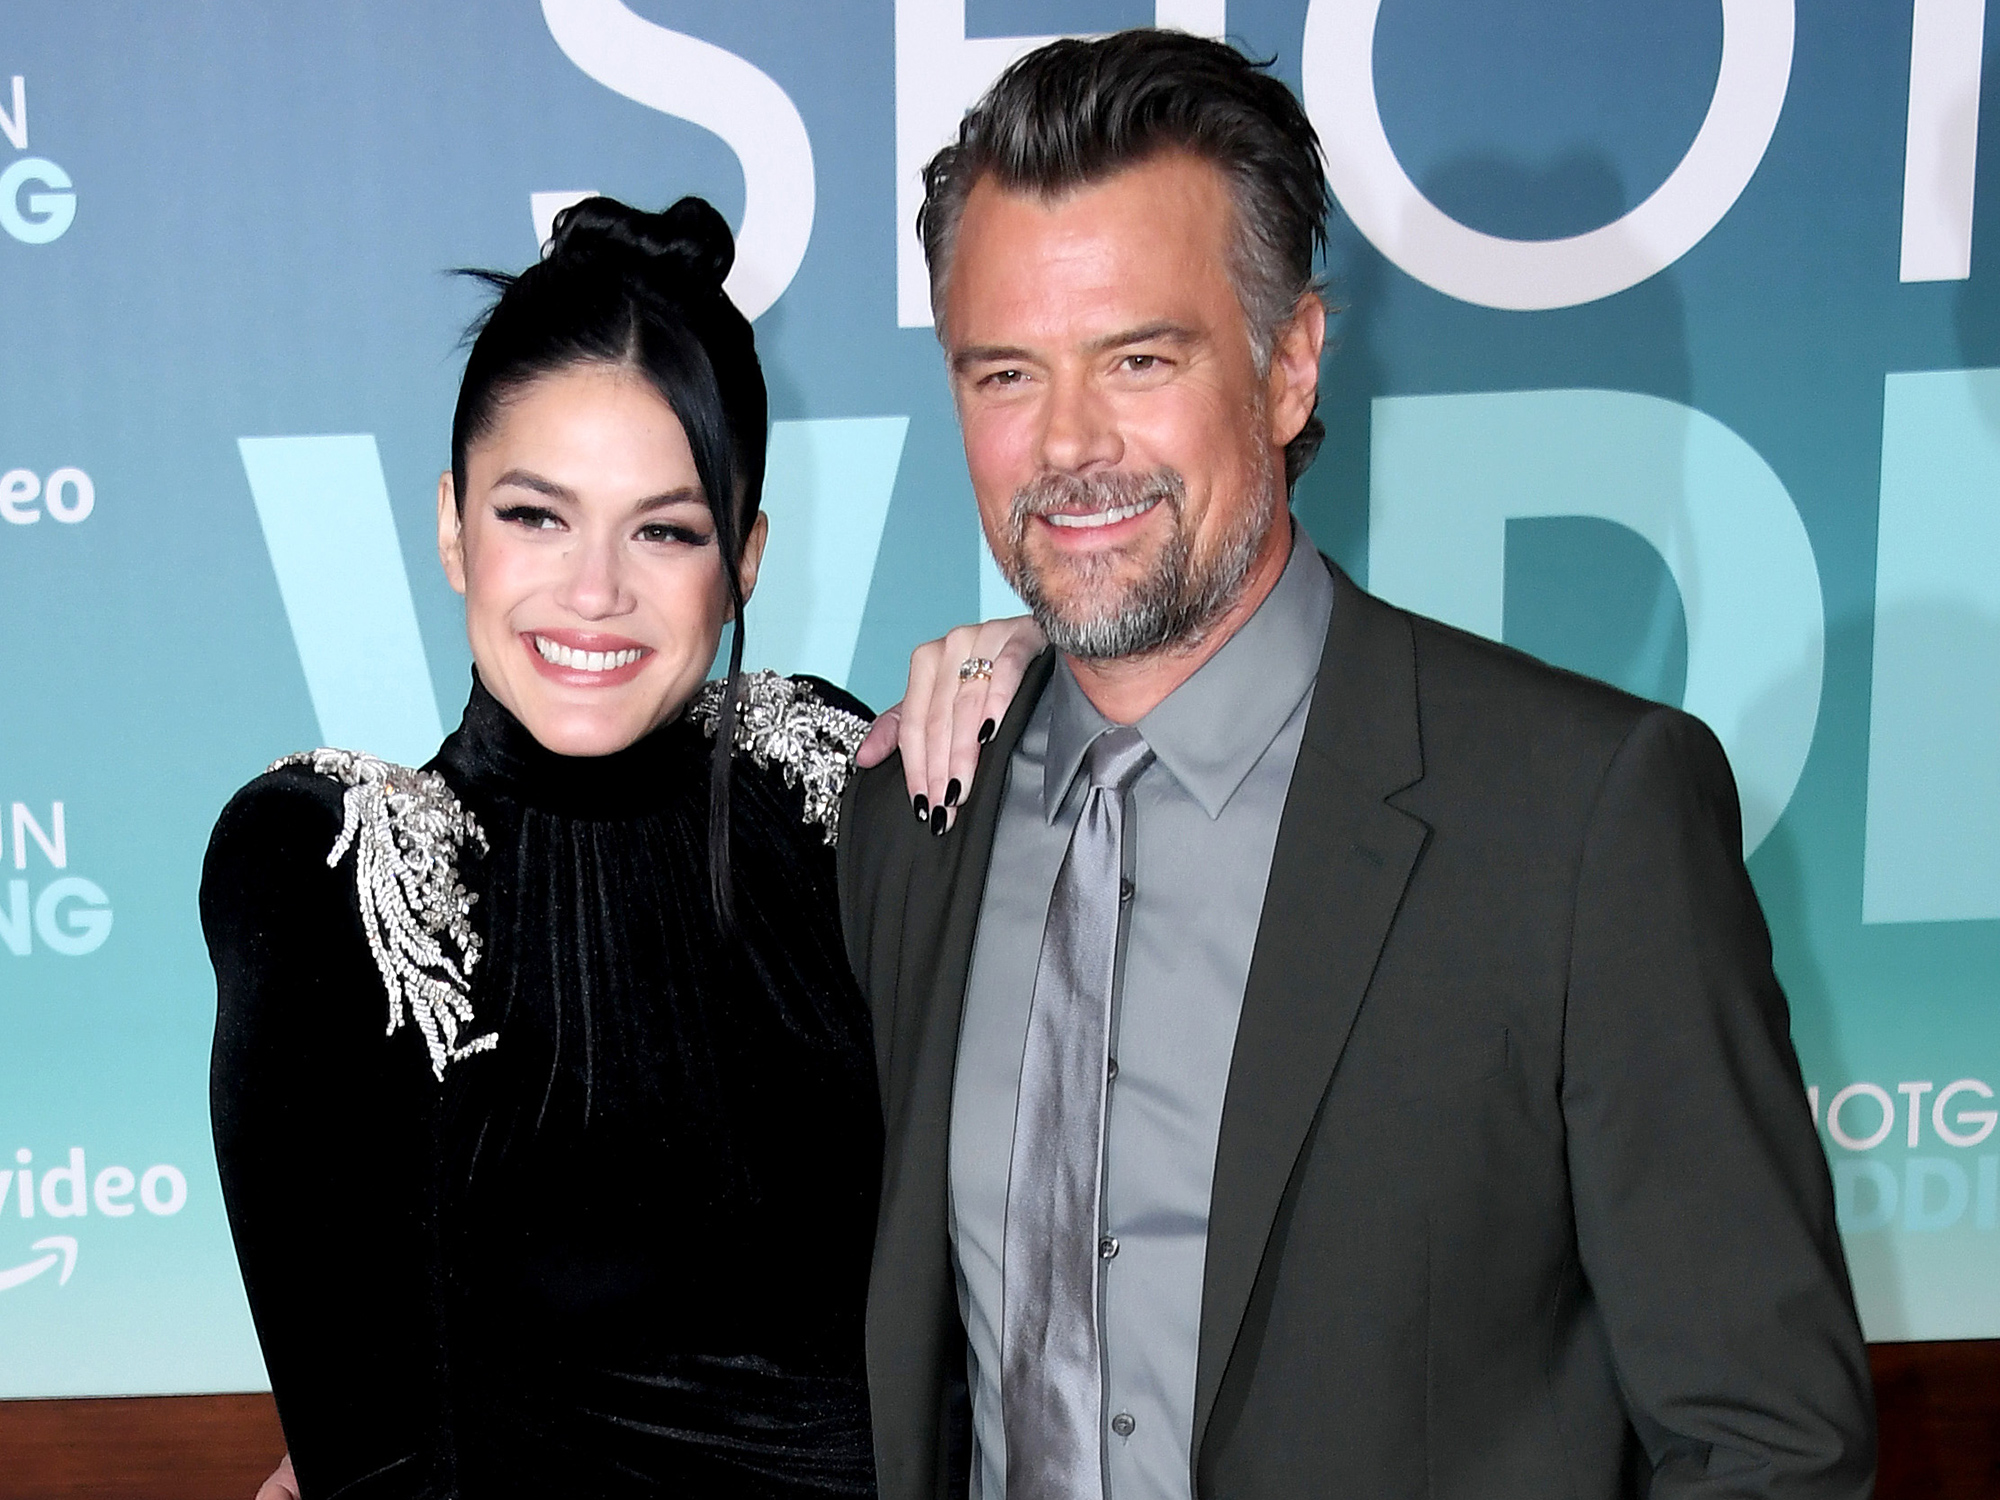 Audra Mari and Josh Duhamel attend the Los Angeles premiere of Prime Video's "Shotgun Wedding" held at TCL Chinese Theatre on January 18, 2023 in Hollywood, California